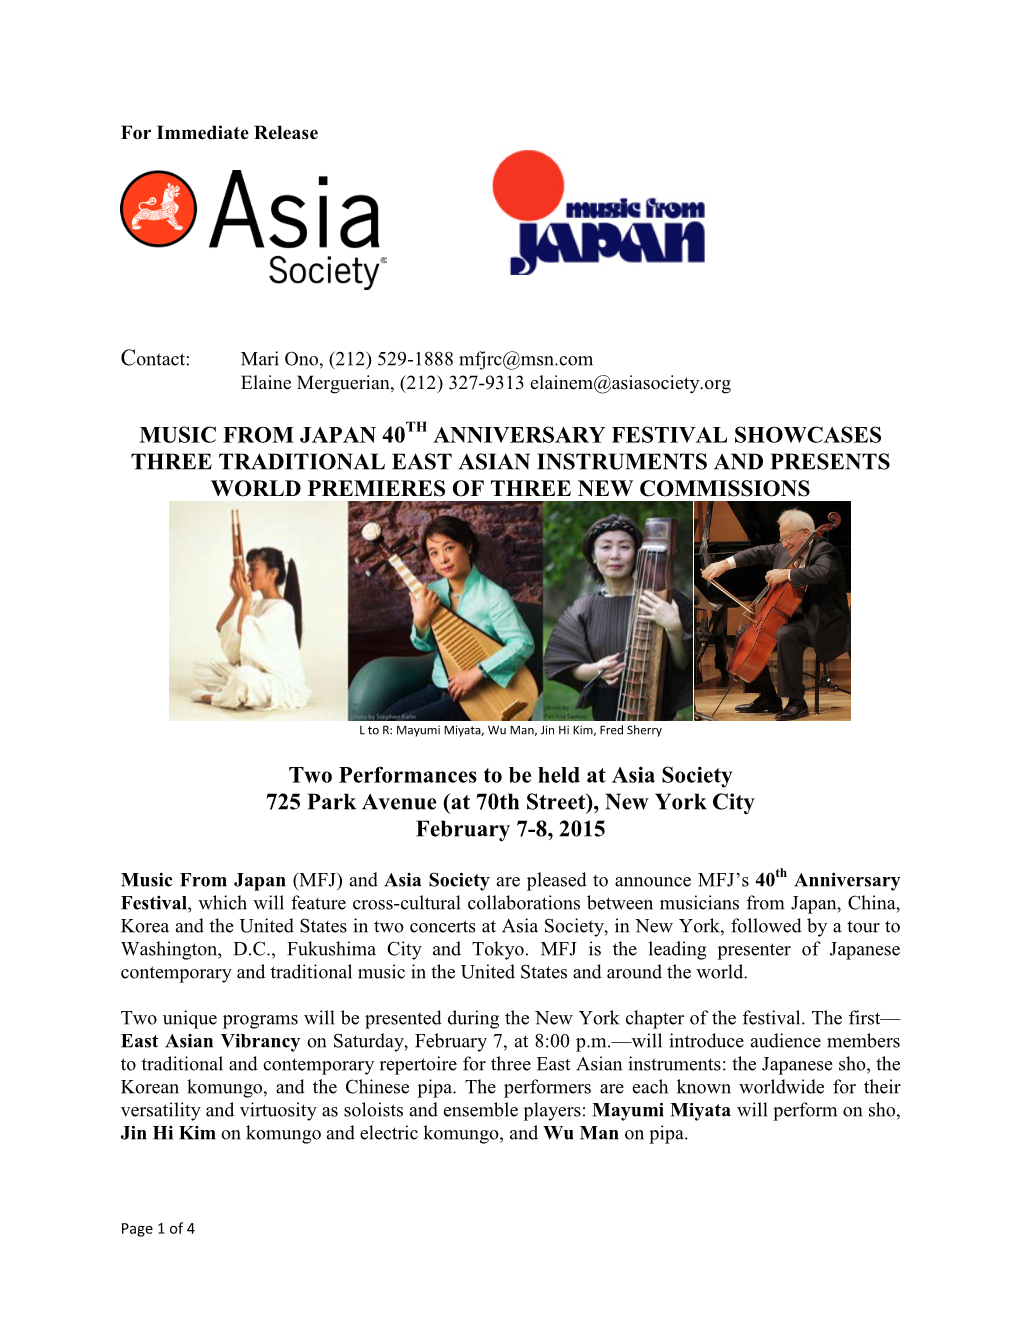 Music from Japan 40 Anniversary Festival Showcases Three Traditional East Asian Instruments and Presents World Premieres of Thre